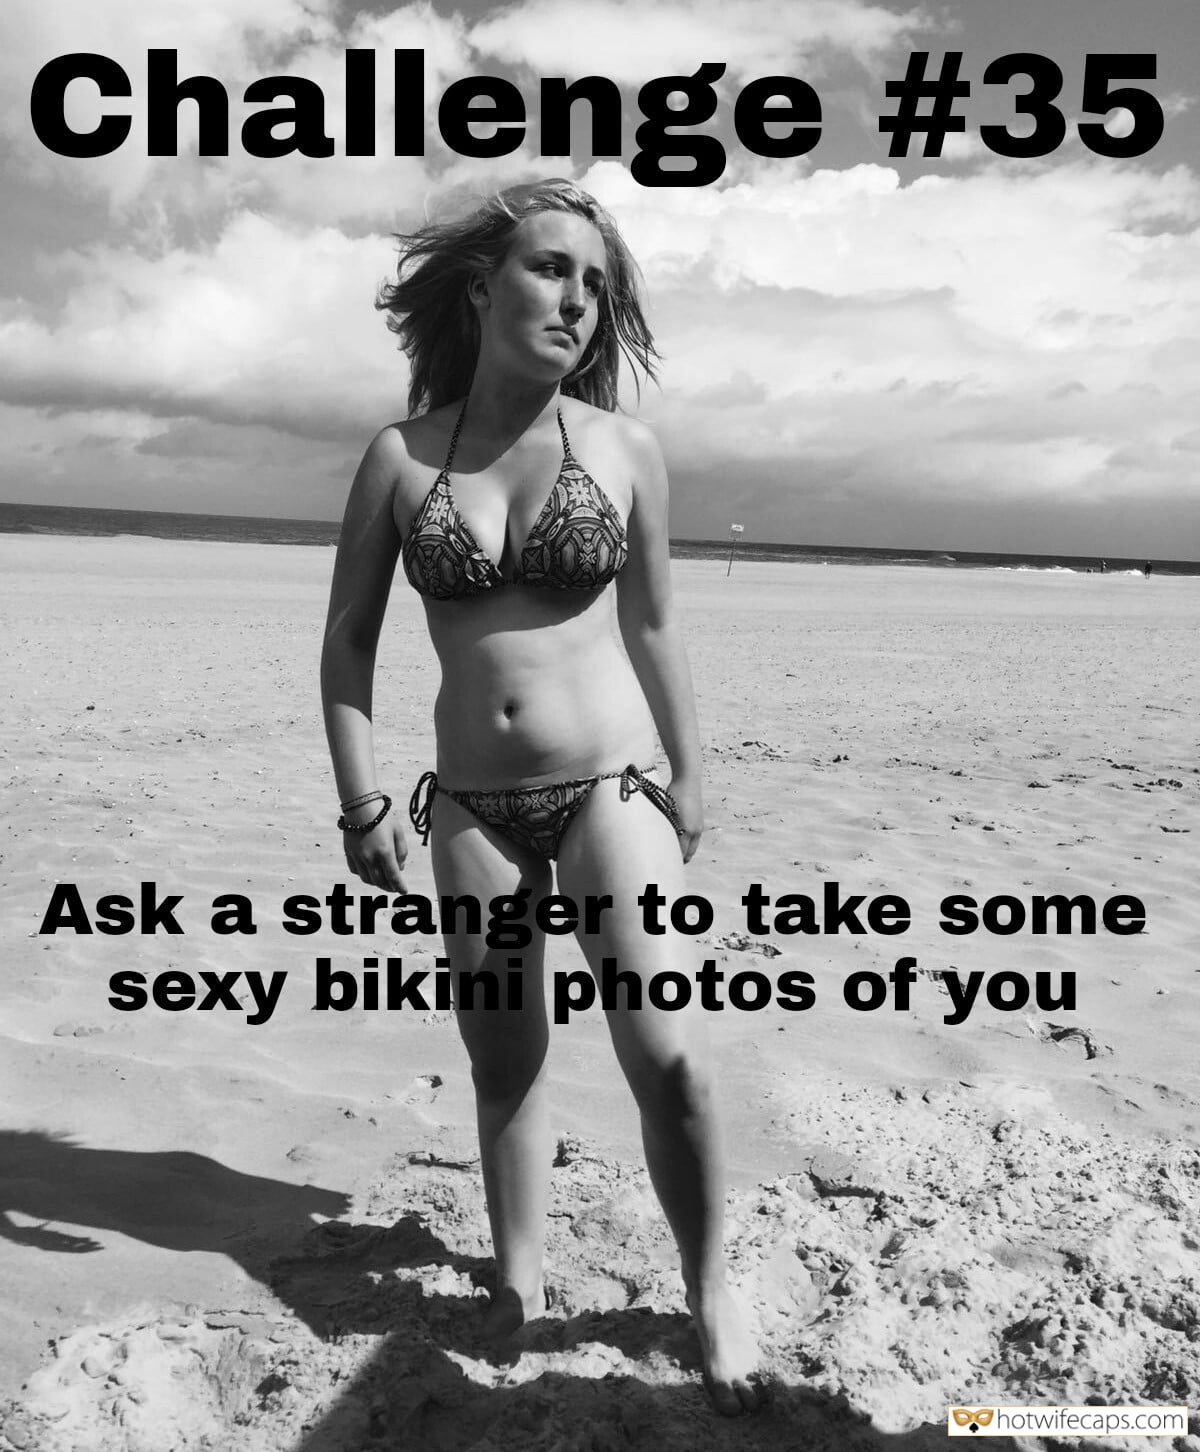 Challenges and Rules hotwife caption: Challenge #35 Ask a stranger to take some sexy bikini photos of you That Is Blessing for the Stranger